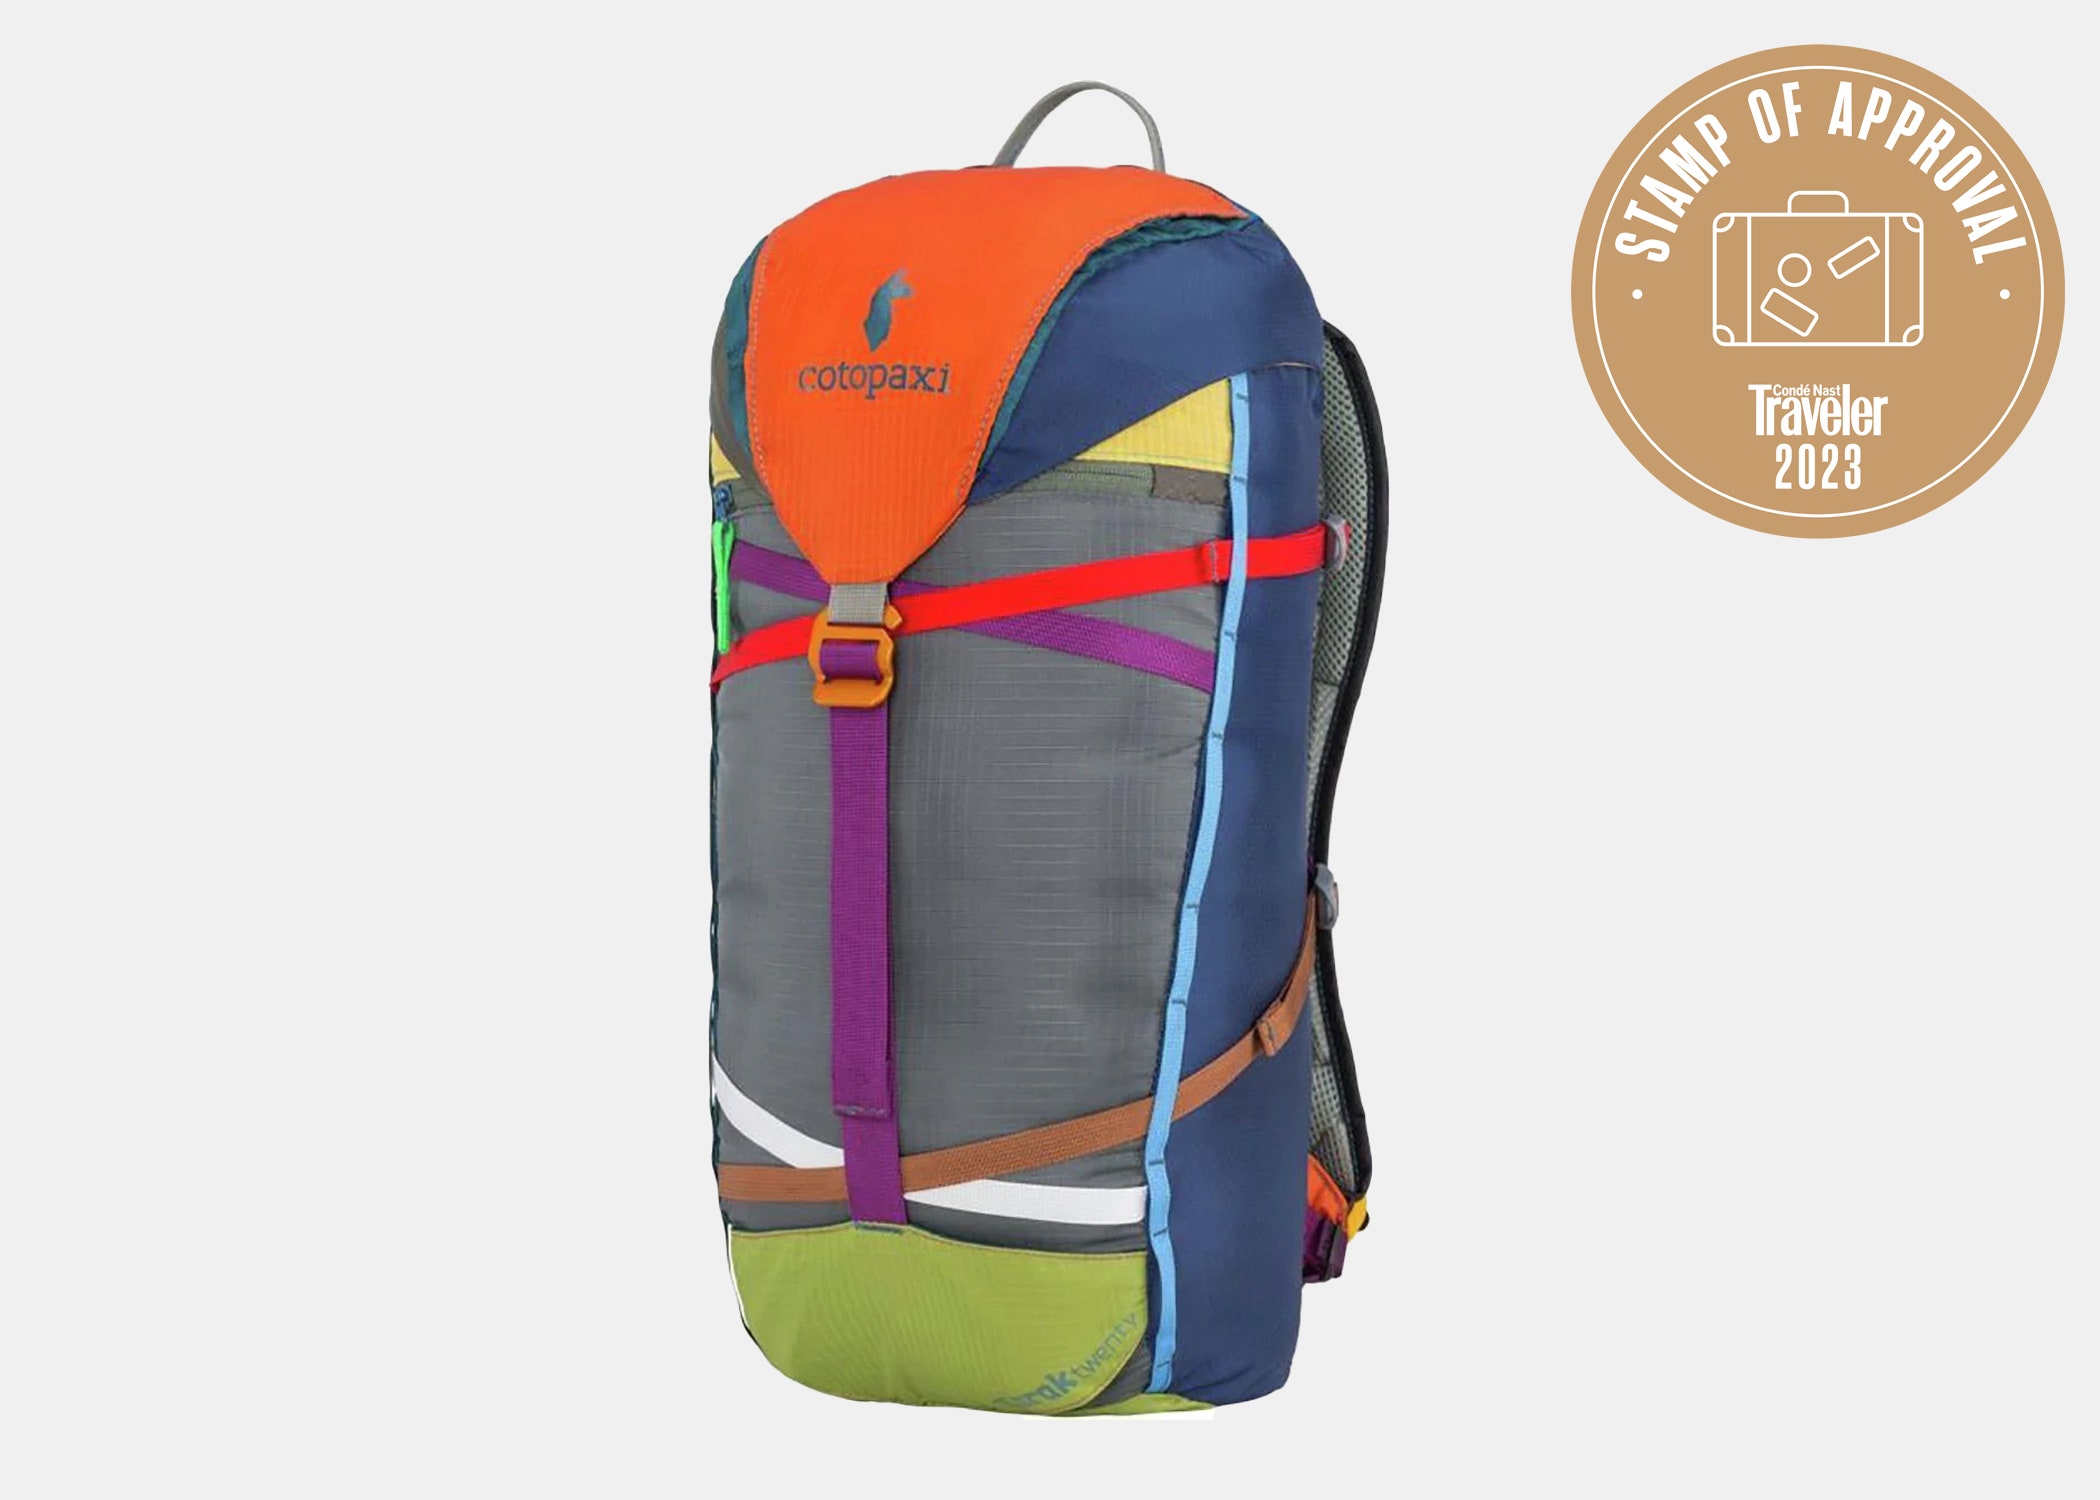 <p>Contributor <a href="https://www.cntraveler.com/contributor/rekaya-gibson?mbid=synd_msn_rss&utm_source=msn&utm_medium=syndication">Rekaya Gibson</a> raves about the amount of space that this backpack offers. “It includes dedicated space to carry heavy-duty gear like ropes and an ice axe with ease, and two exterior pockets to keep smaller items organized,” she says. The top of the bag has a convenient drawstring that secures your items on the top before covering it with the flap. Each bag comes from repurposed materials which vary slightly—this helps reduce waste, making it a more environmentally friendly pick, too.</p> <p><strong>Pros:</strong> Has a lot of security elements (which is great for hikes)<br> <strong>Cons:</strong> Shows wear quickly depending on your trek</p> $100, Backcountry. <a href="https://www.backcountry.com/cotopaxi-tarak-20l-pack">Get it now!</a><p>Sign up to receive the latest news, expert tips, and inspiration on all things travel</p><a href="https://www.cntraveler.com/newsletter/the-daily?sourceCode=msnsend">Inspire Me</a>